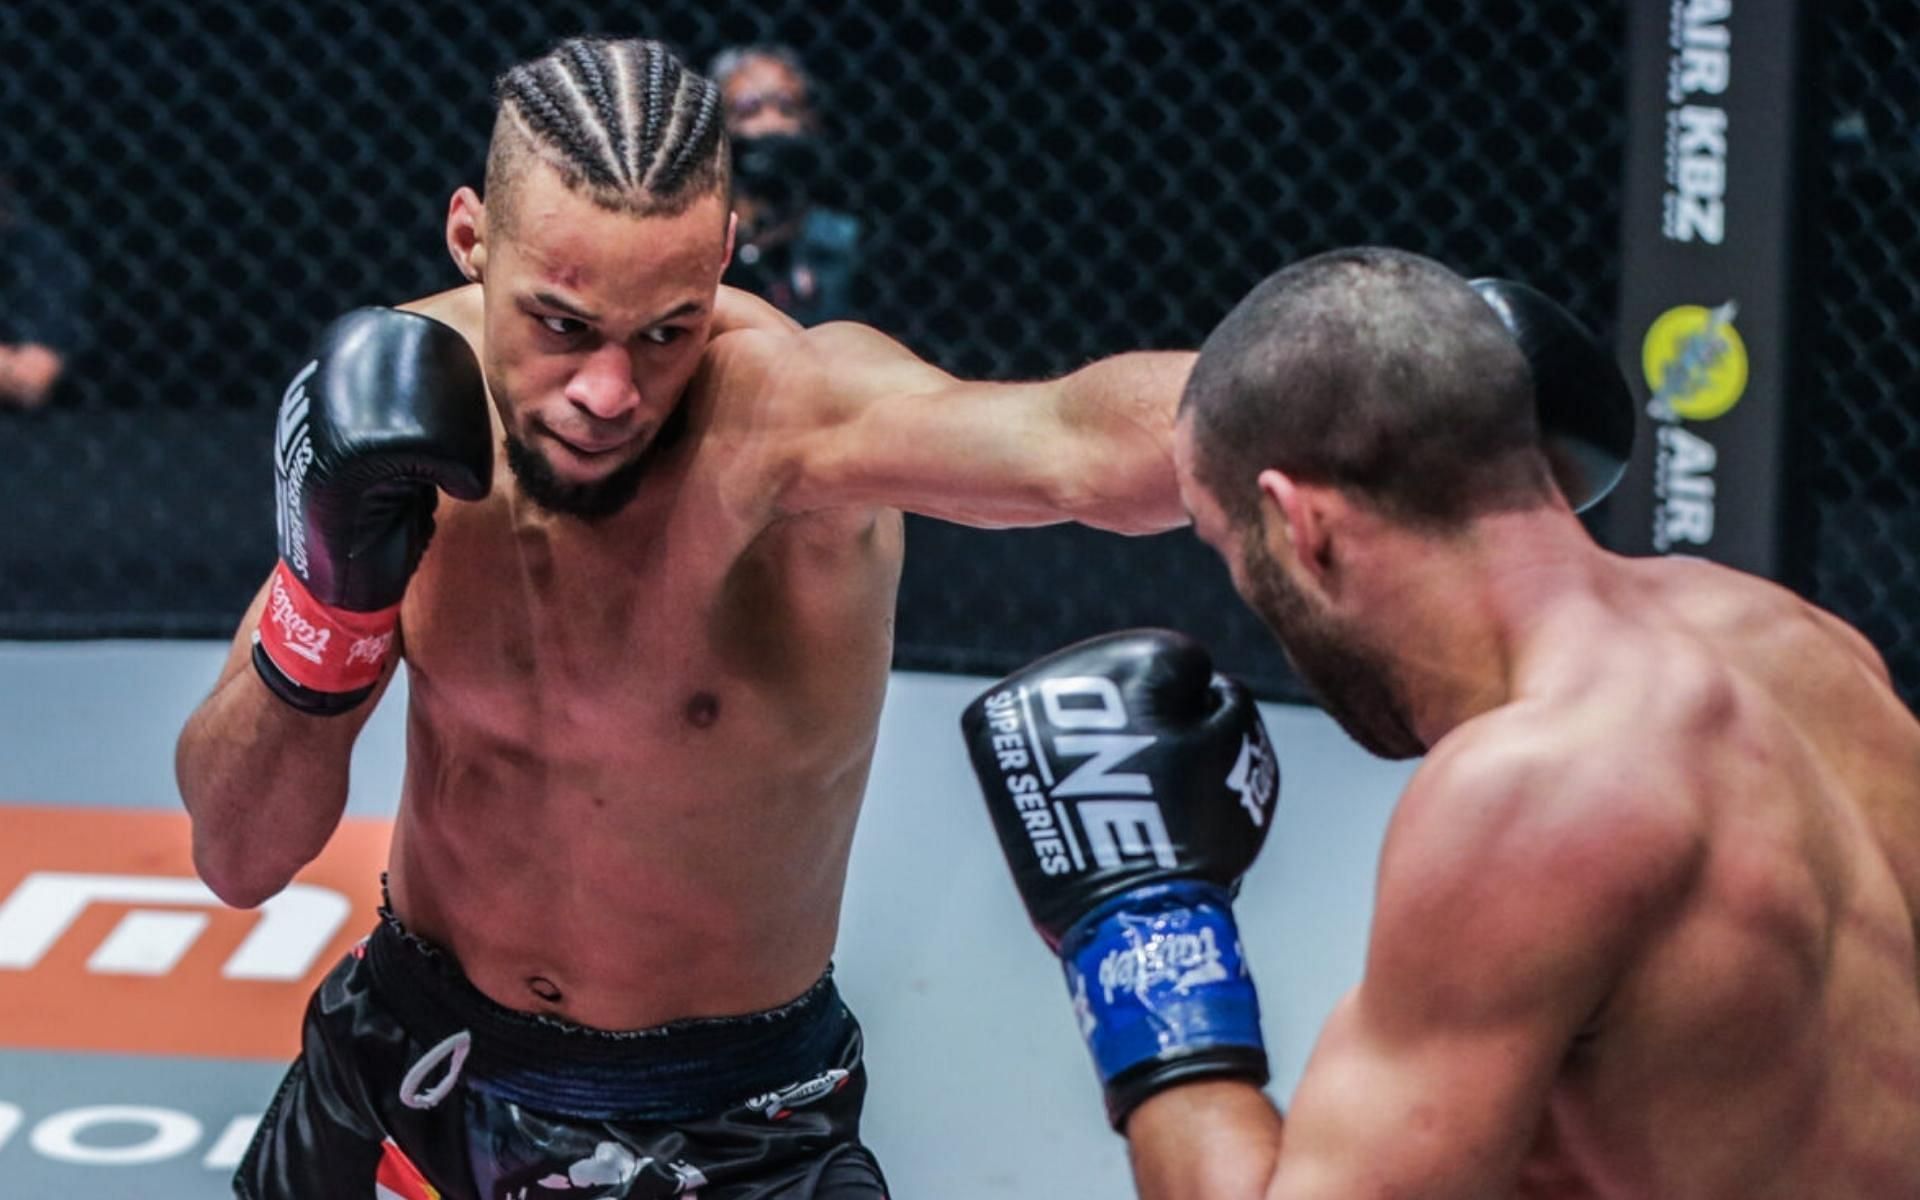 Our ONE Championship prediction for the main event of ONE: Winter Warriors would be lightweight kickboxing champion Regian Eersel (left) beating newcomer Islam Murtazaev via decision. (Image courtesy of ONE Championship)